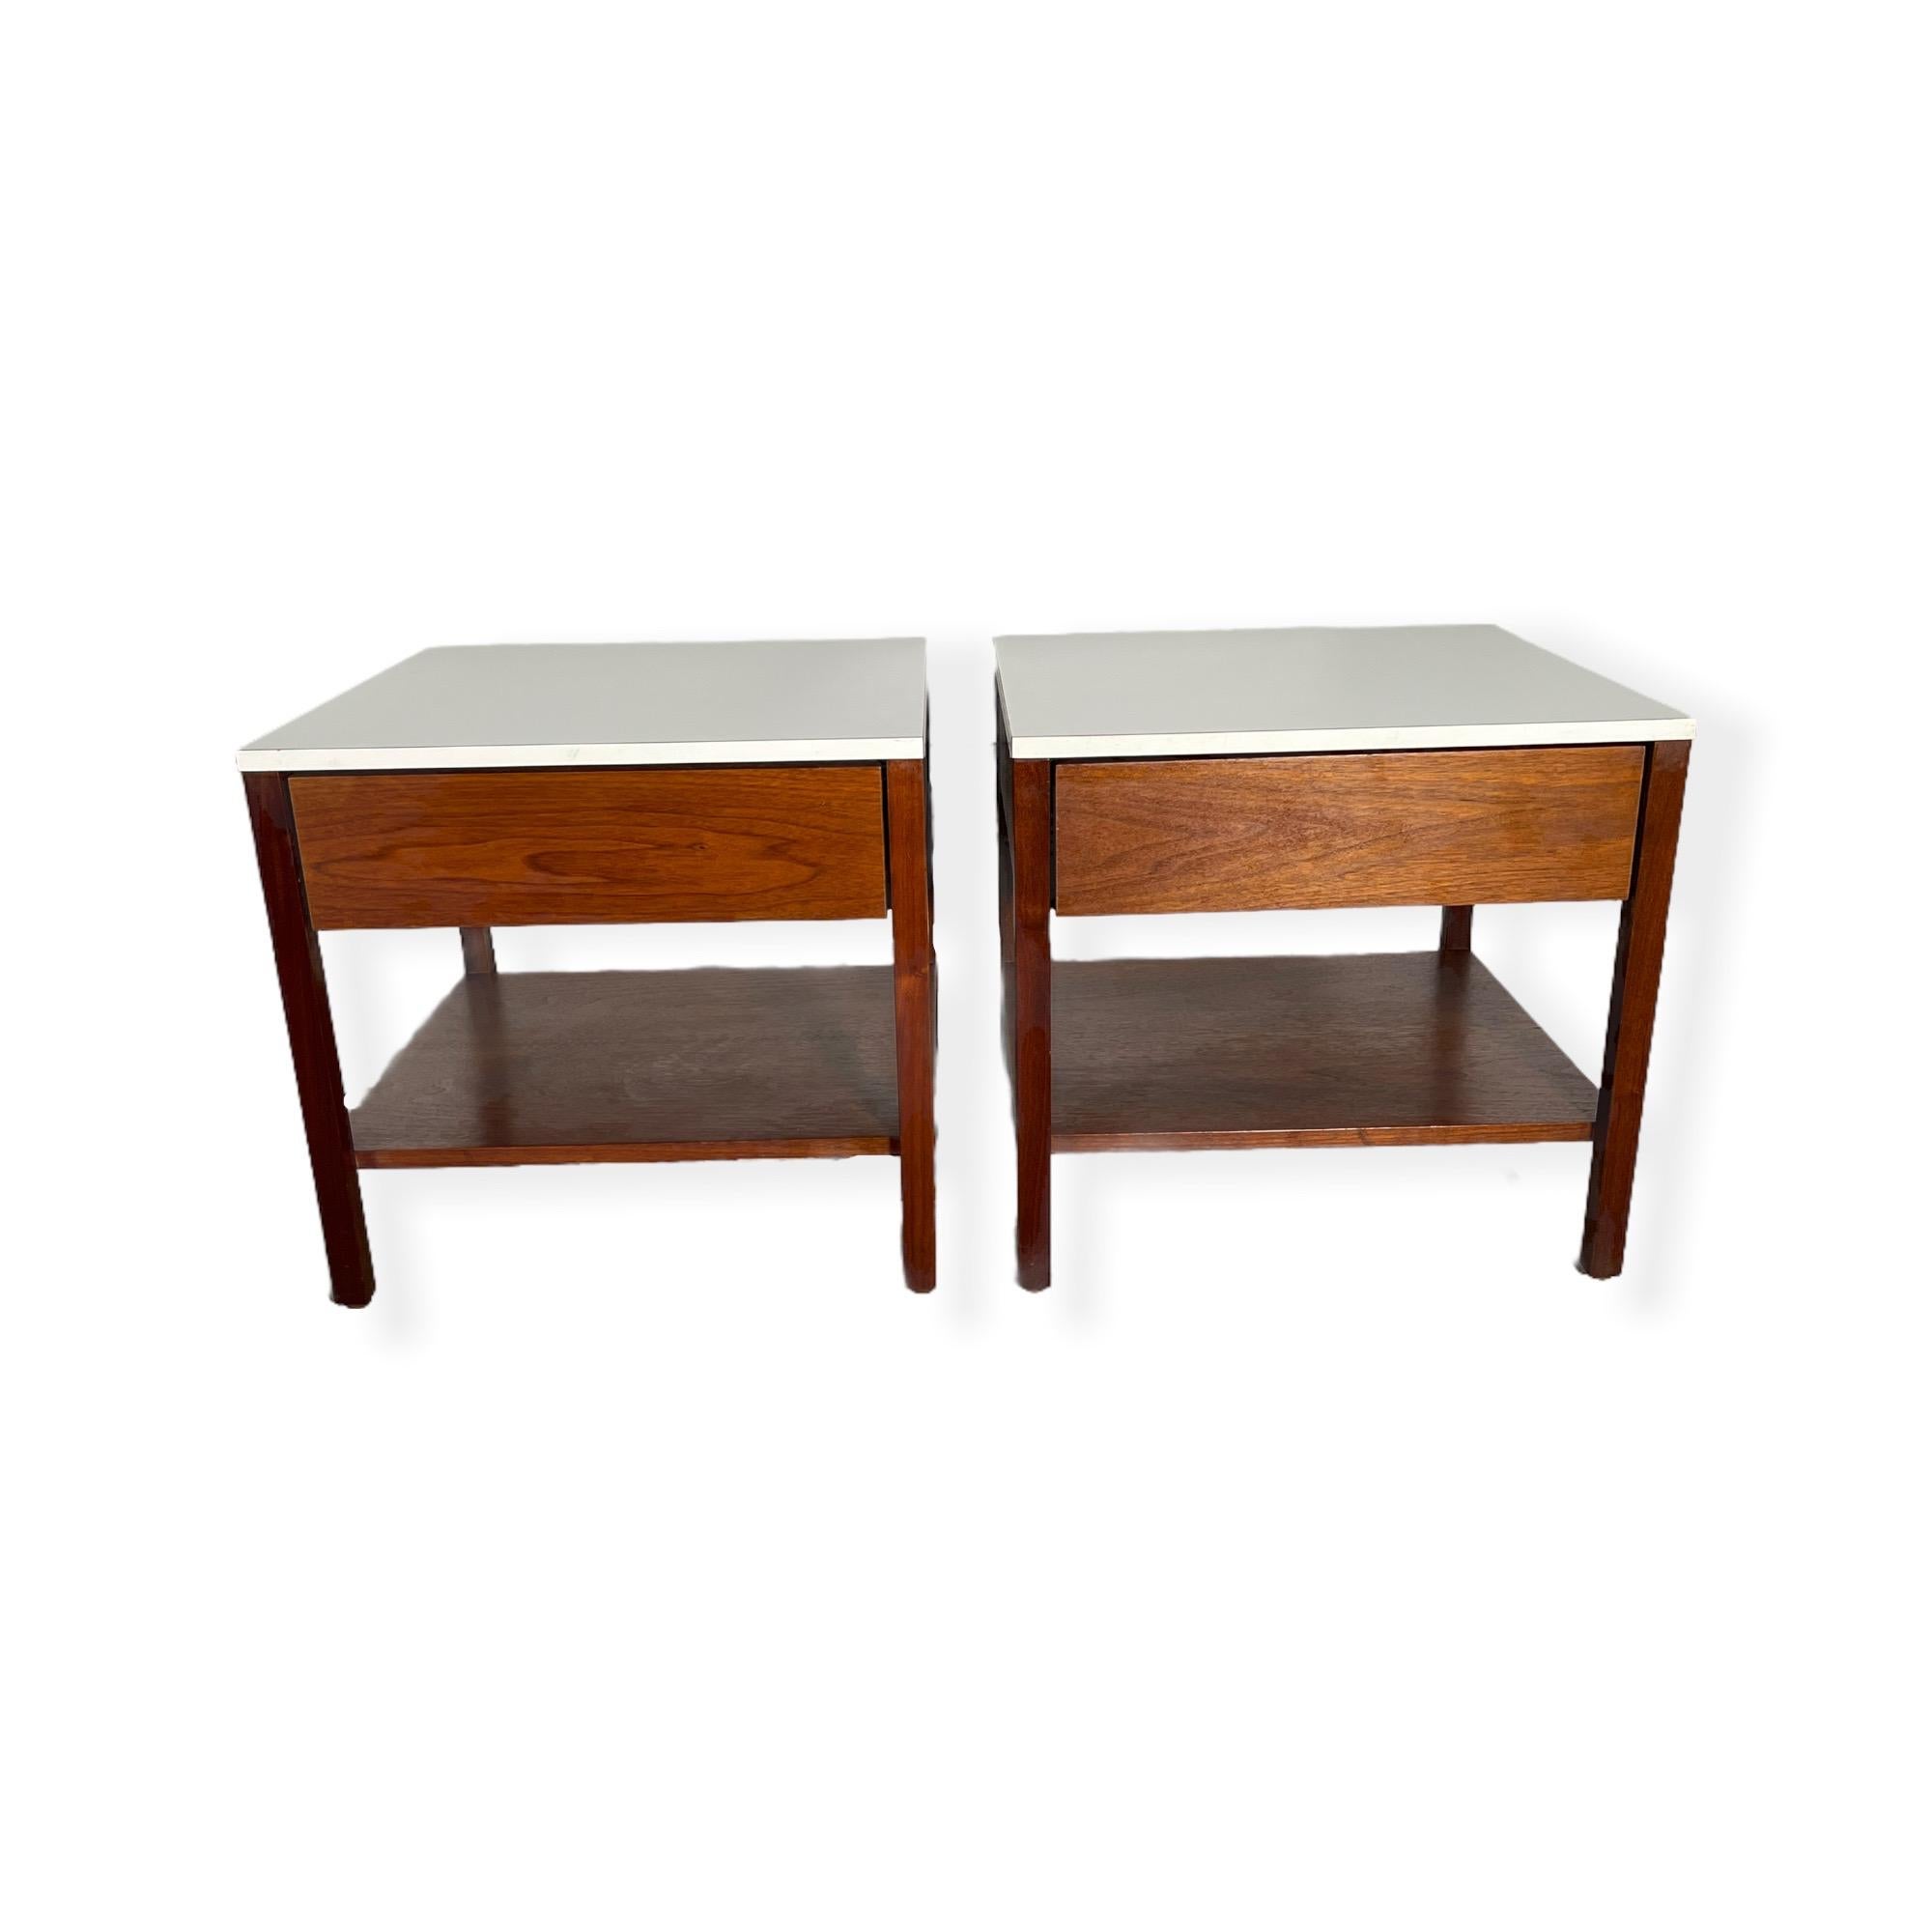 Pair of Mid-Century Modern walnut nightstands by Florence Knoll with White top. This nightstands features beautiful simple modern lines, stunning walnut wood grains, and one drawer. The nightstands are in good vintage condition. 

Measures: W